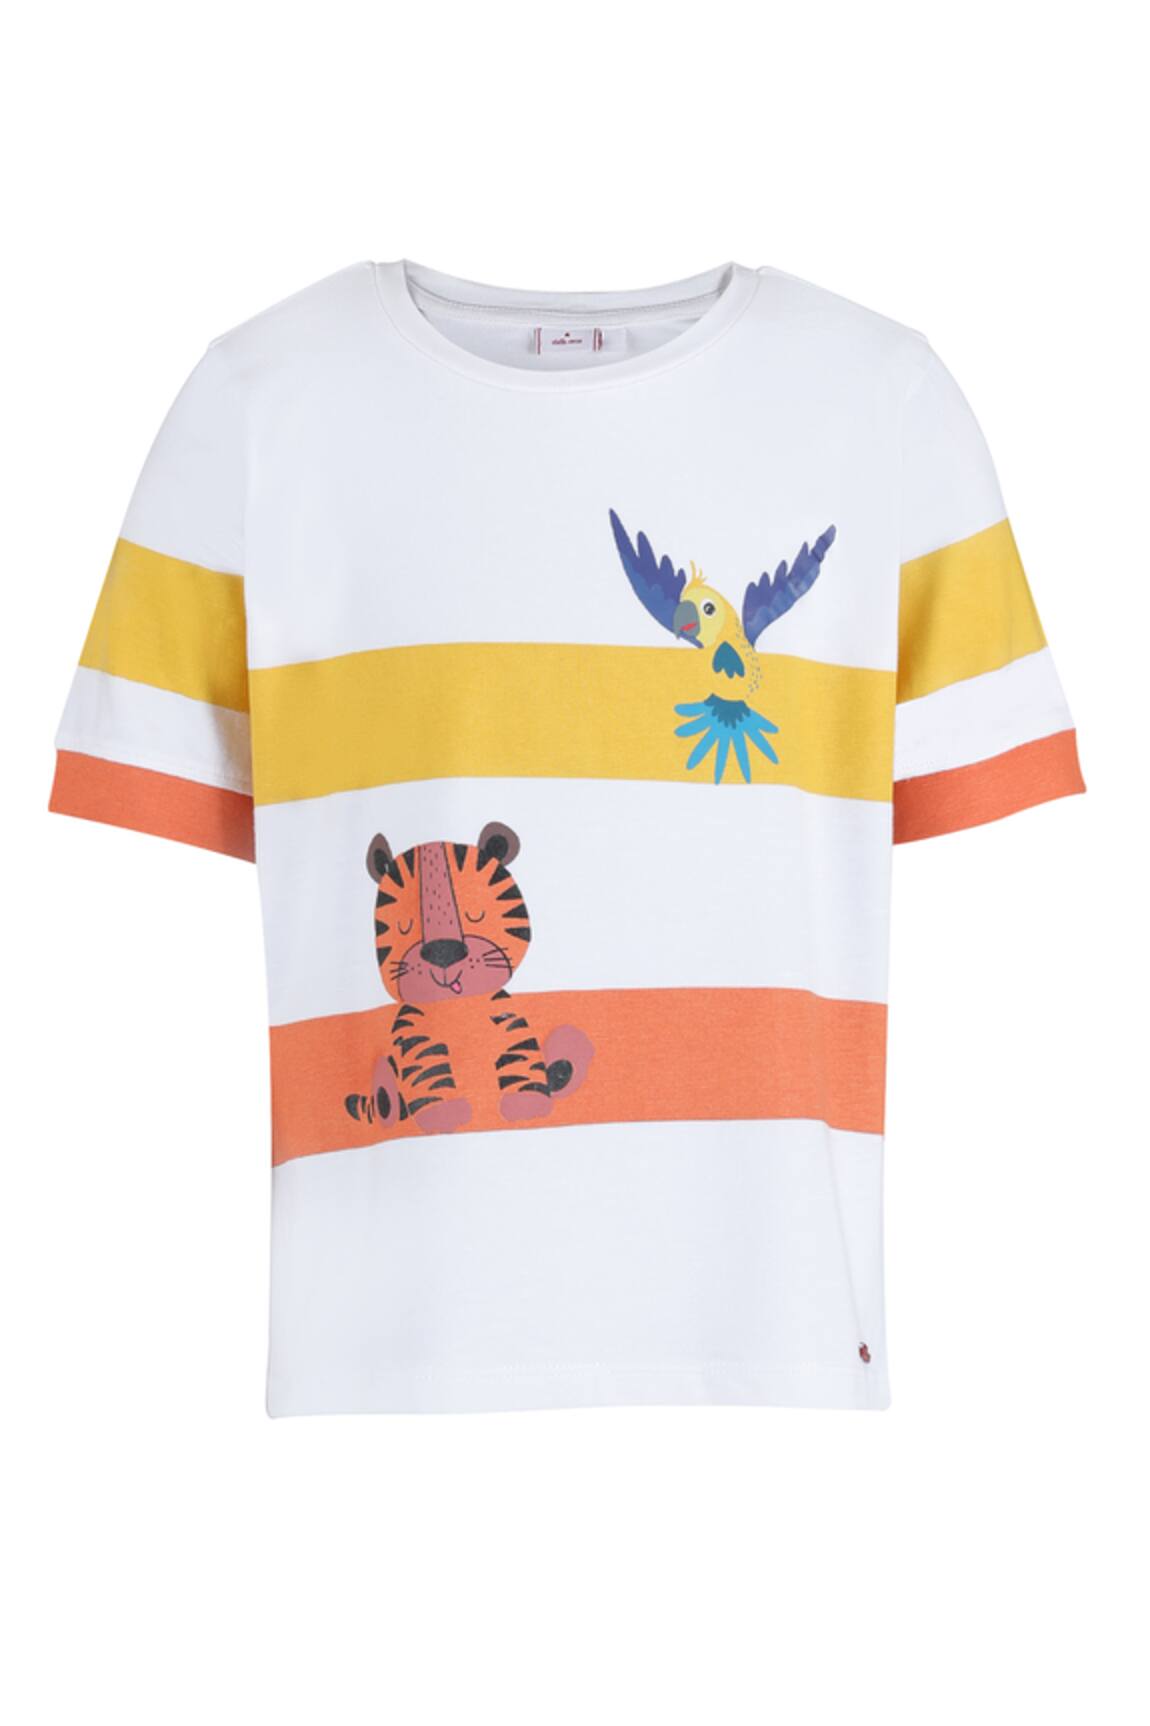 Rang by Lespetits Tiger Parrot Camouflage T-Shirt